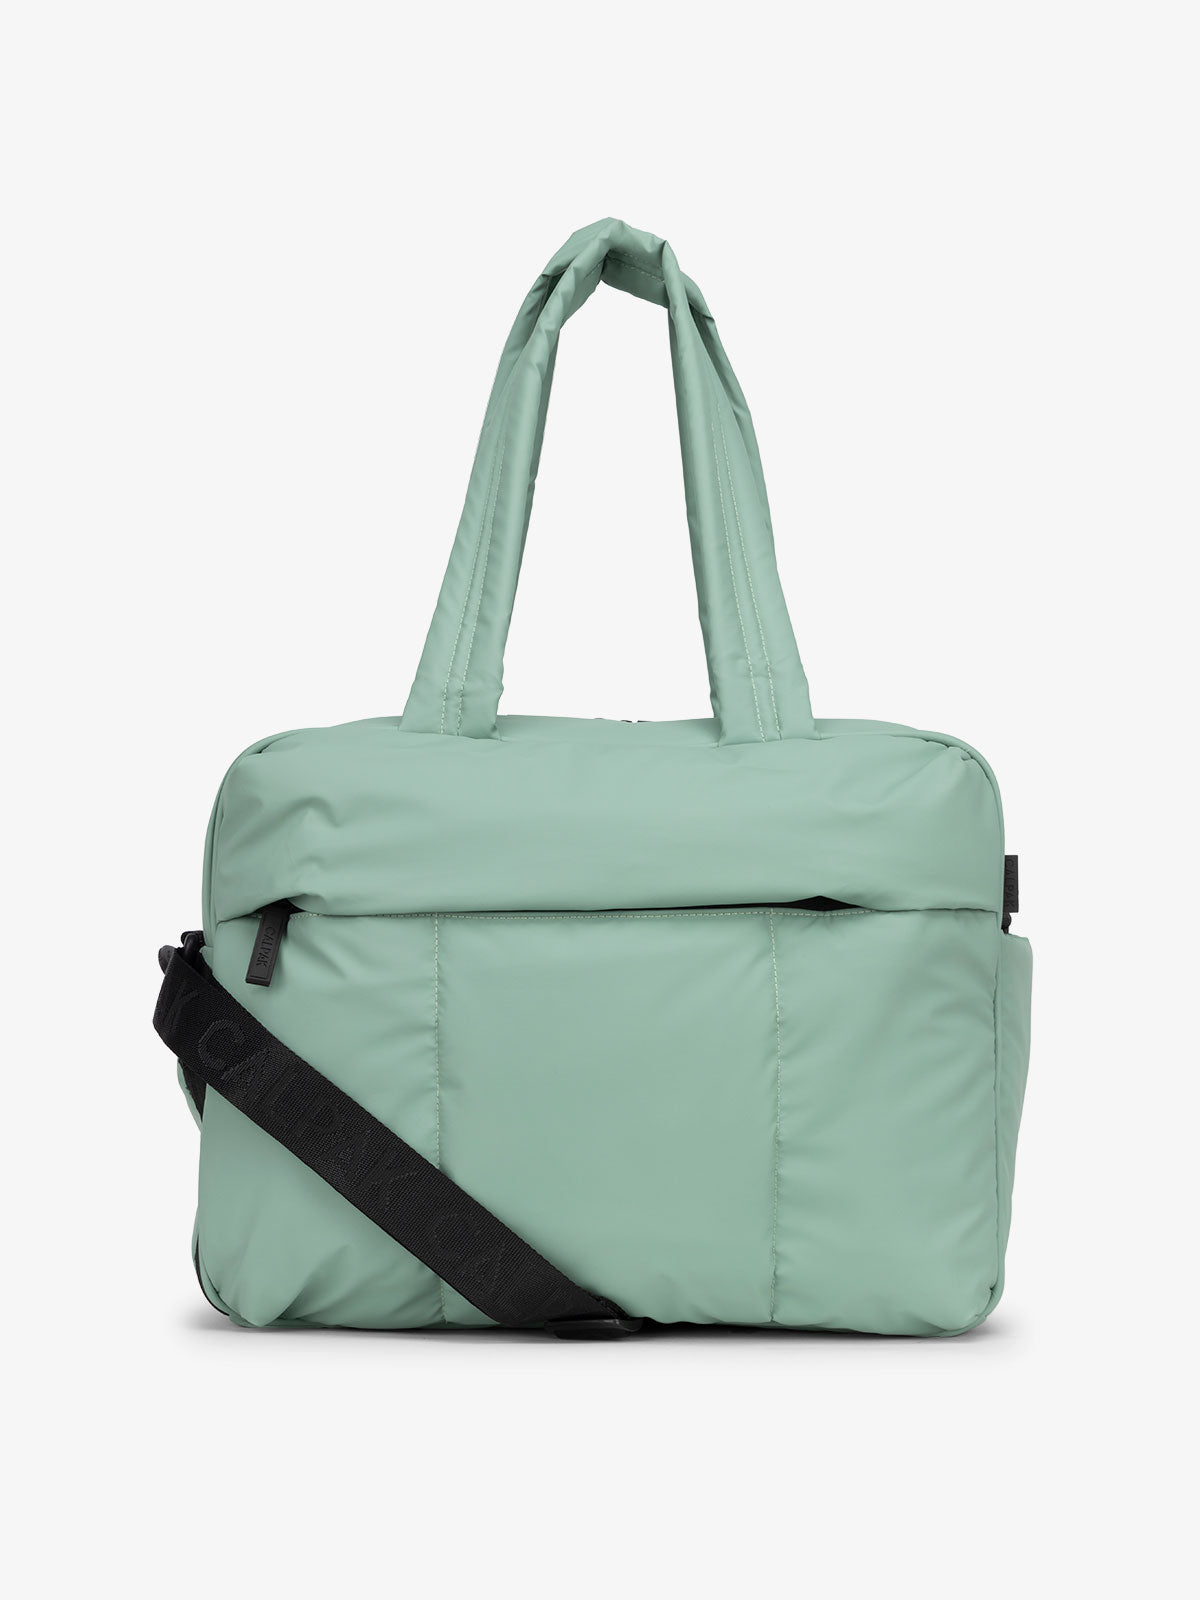 CALPAK Luka Duffel puffy Bag with detachable strap and zippered front pocket in sage green